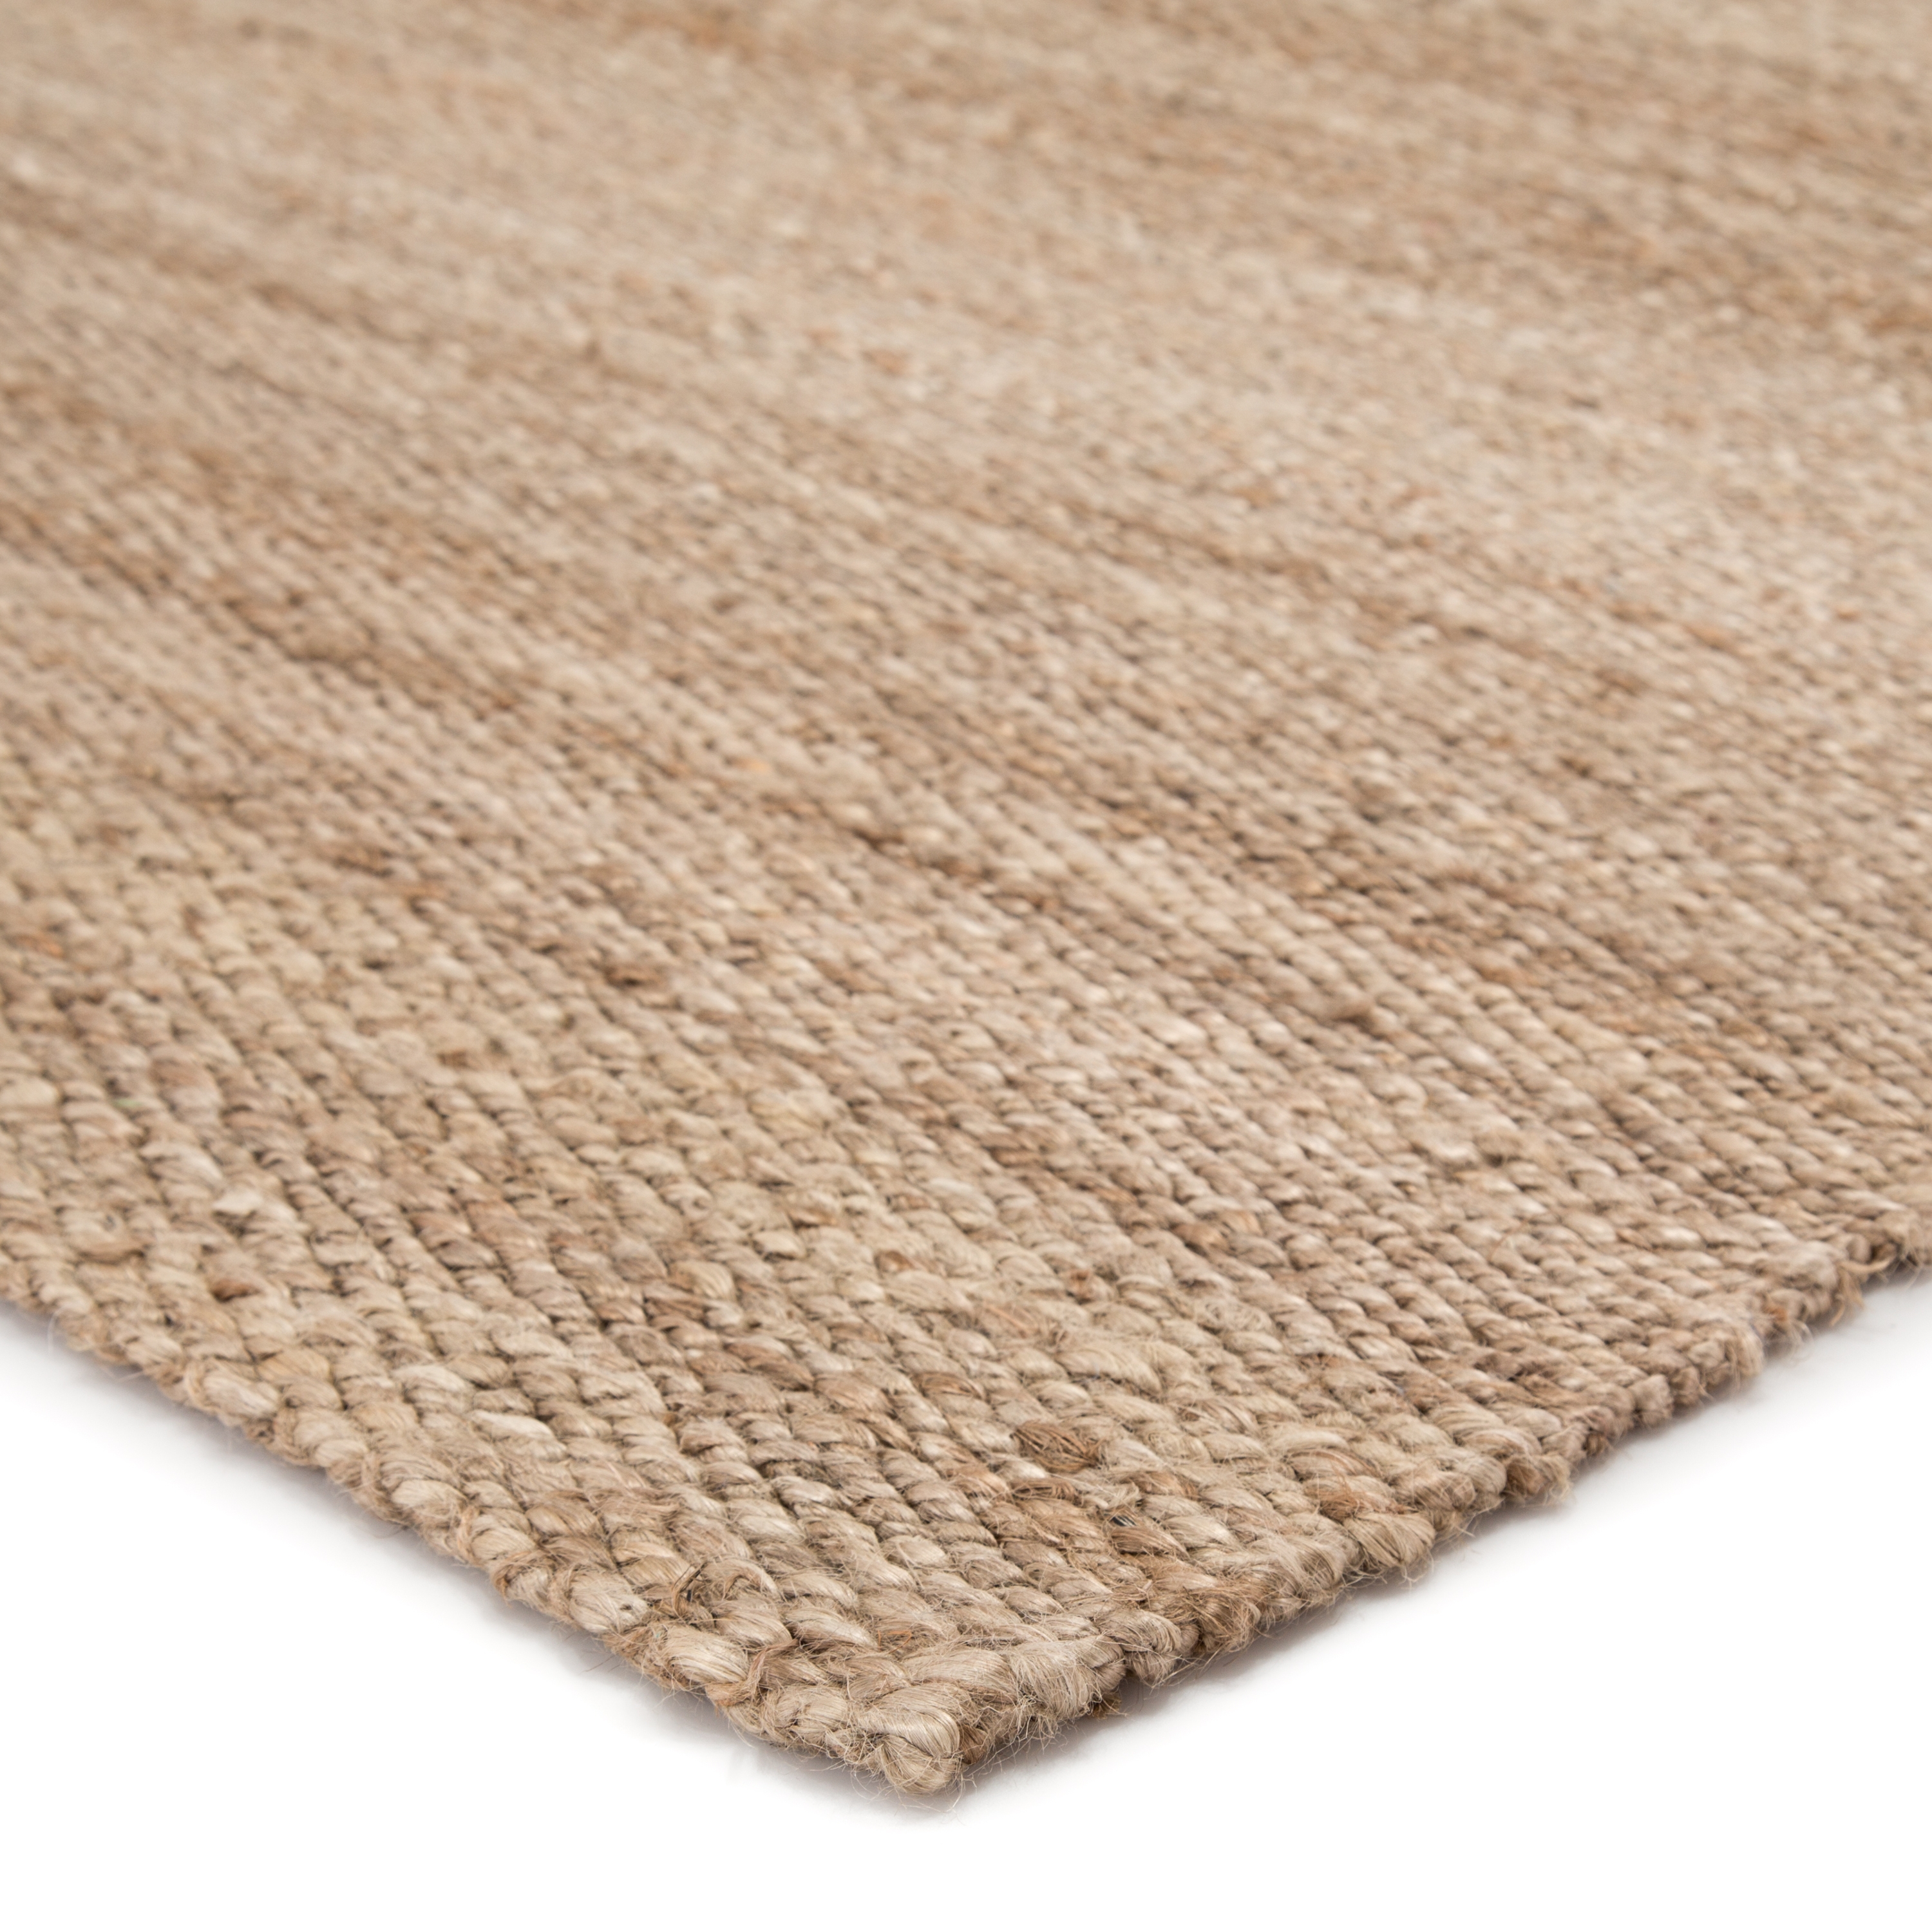 Hilo Natural Solid Tan Area Rug (5'X8') - Image 1